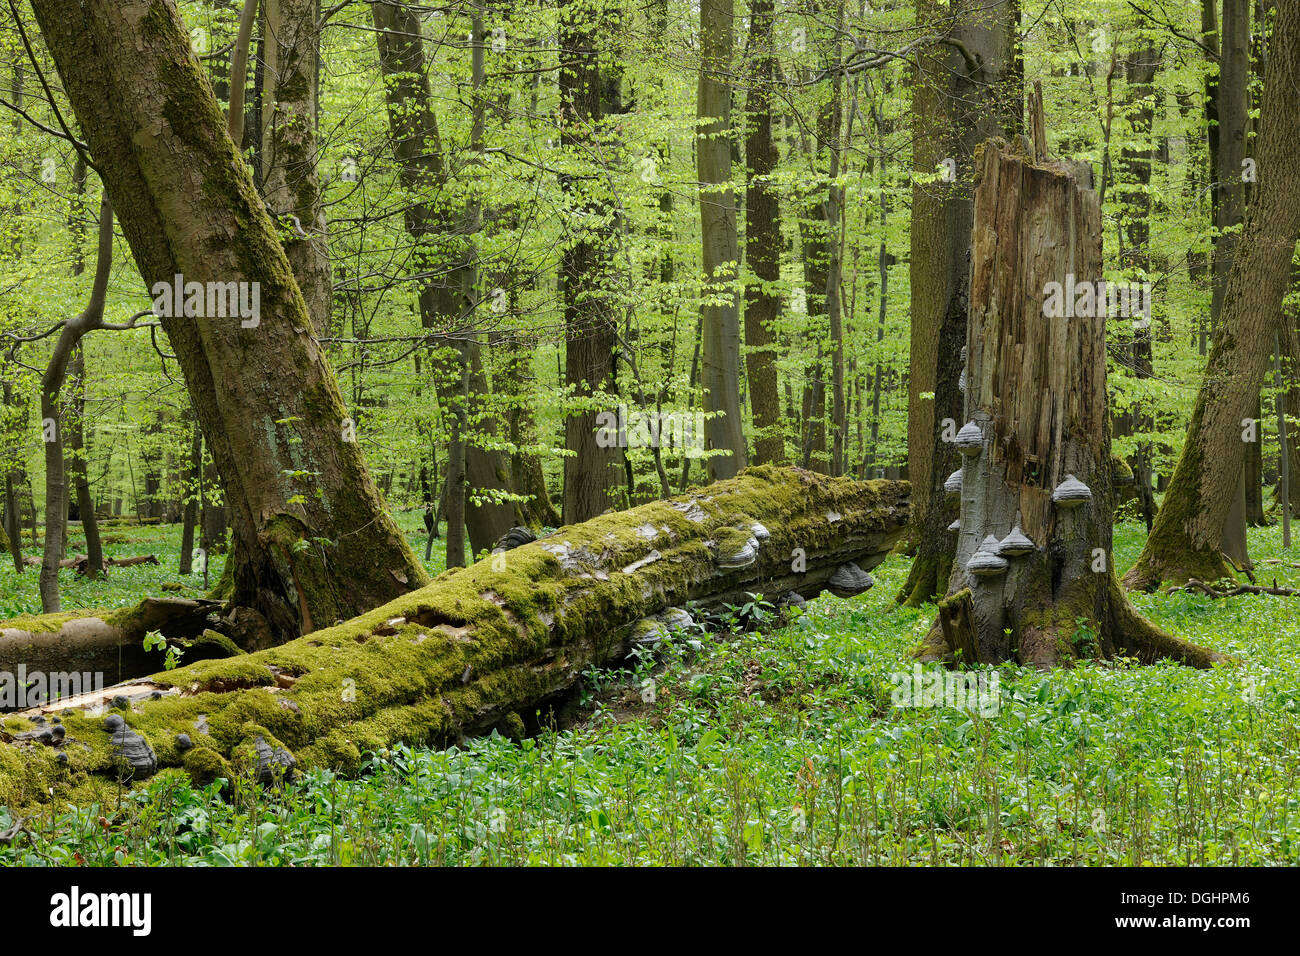 Deadwood with Tinder Fungus (Fomes fomentarius), beech forest in spring, Hainich National Park, Thuringia, Germany Stock Photo